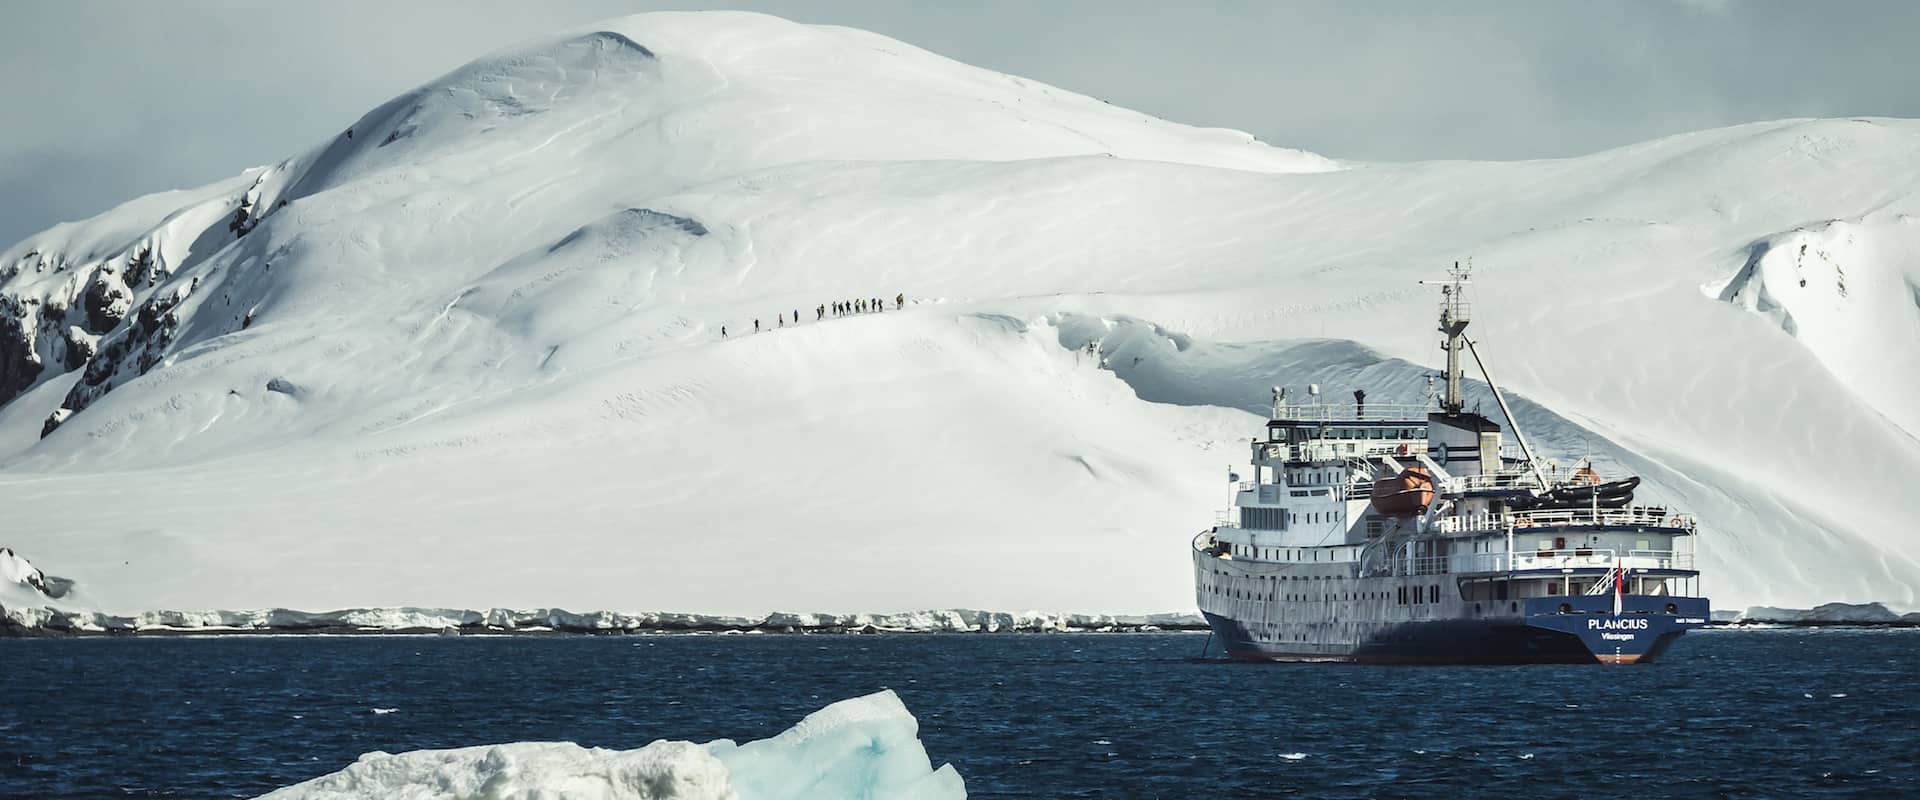 Small Ship Cruise to the South Pole